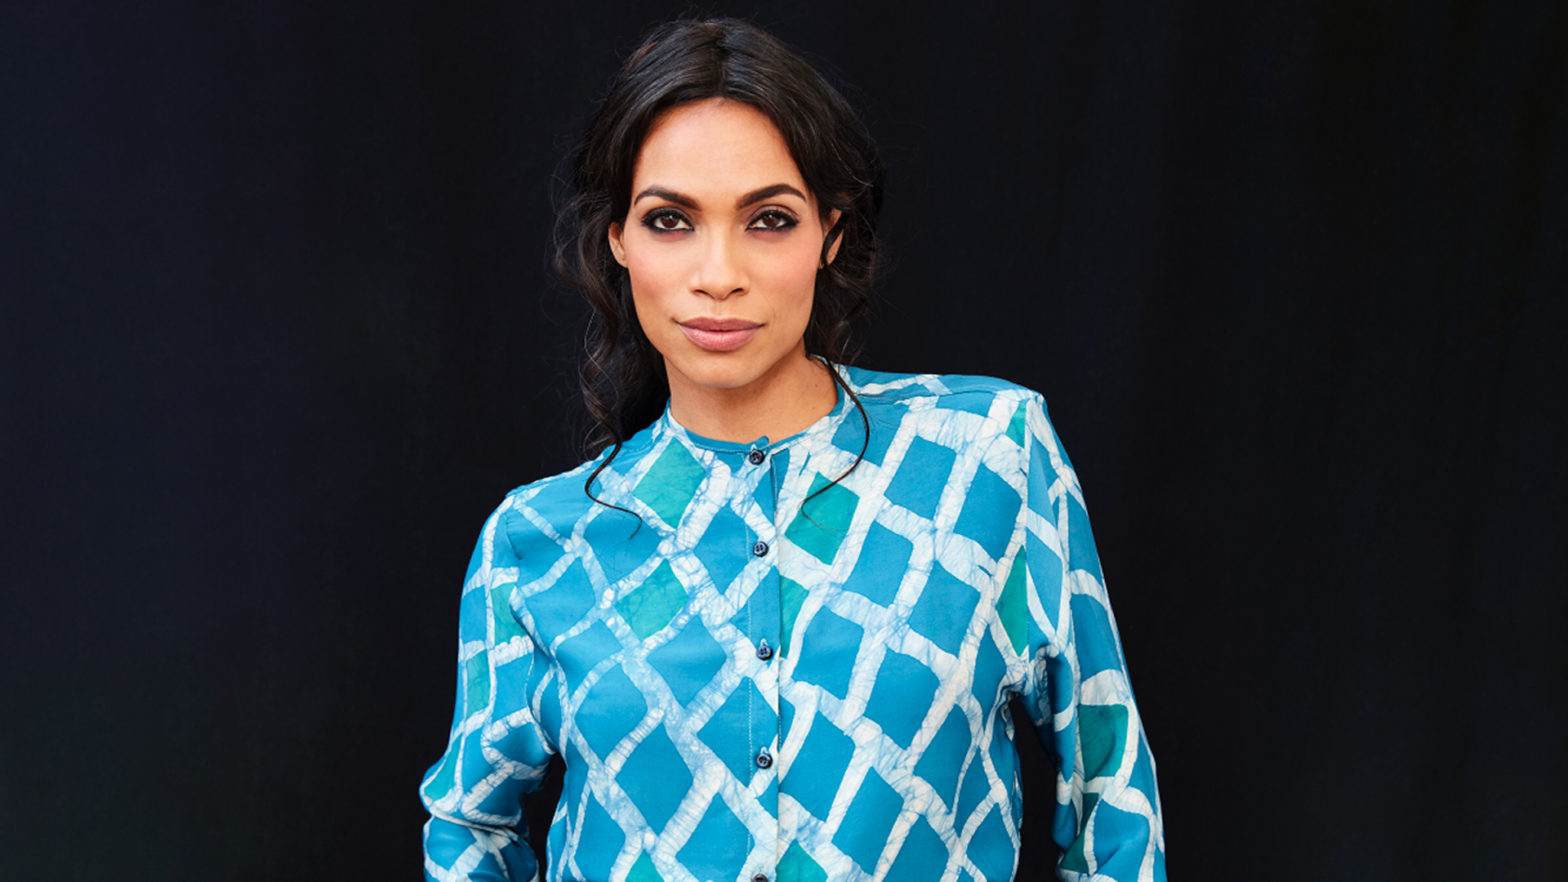 Rosario Dawson Becomes One Of The First Women Of Color To Join The Board Of A Major Cannabis Brand